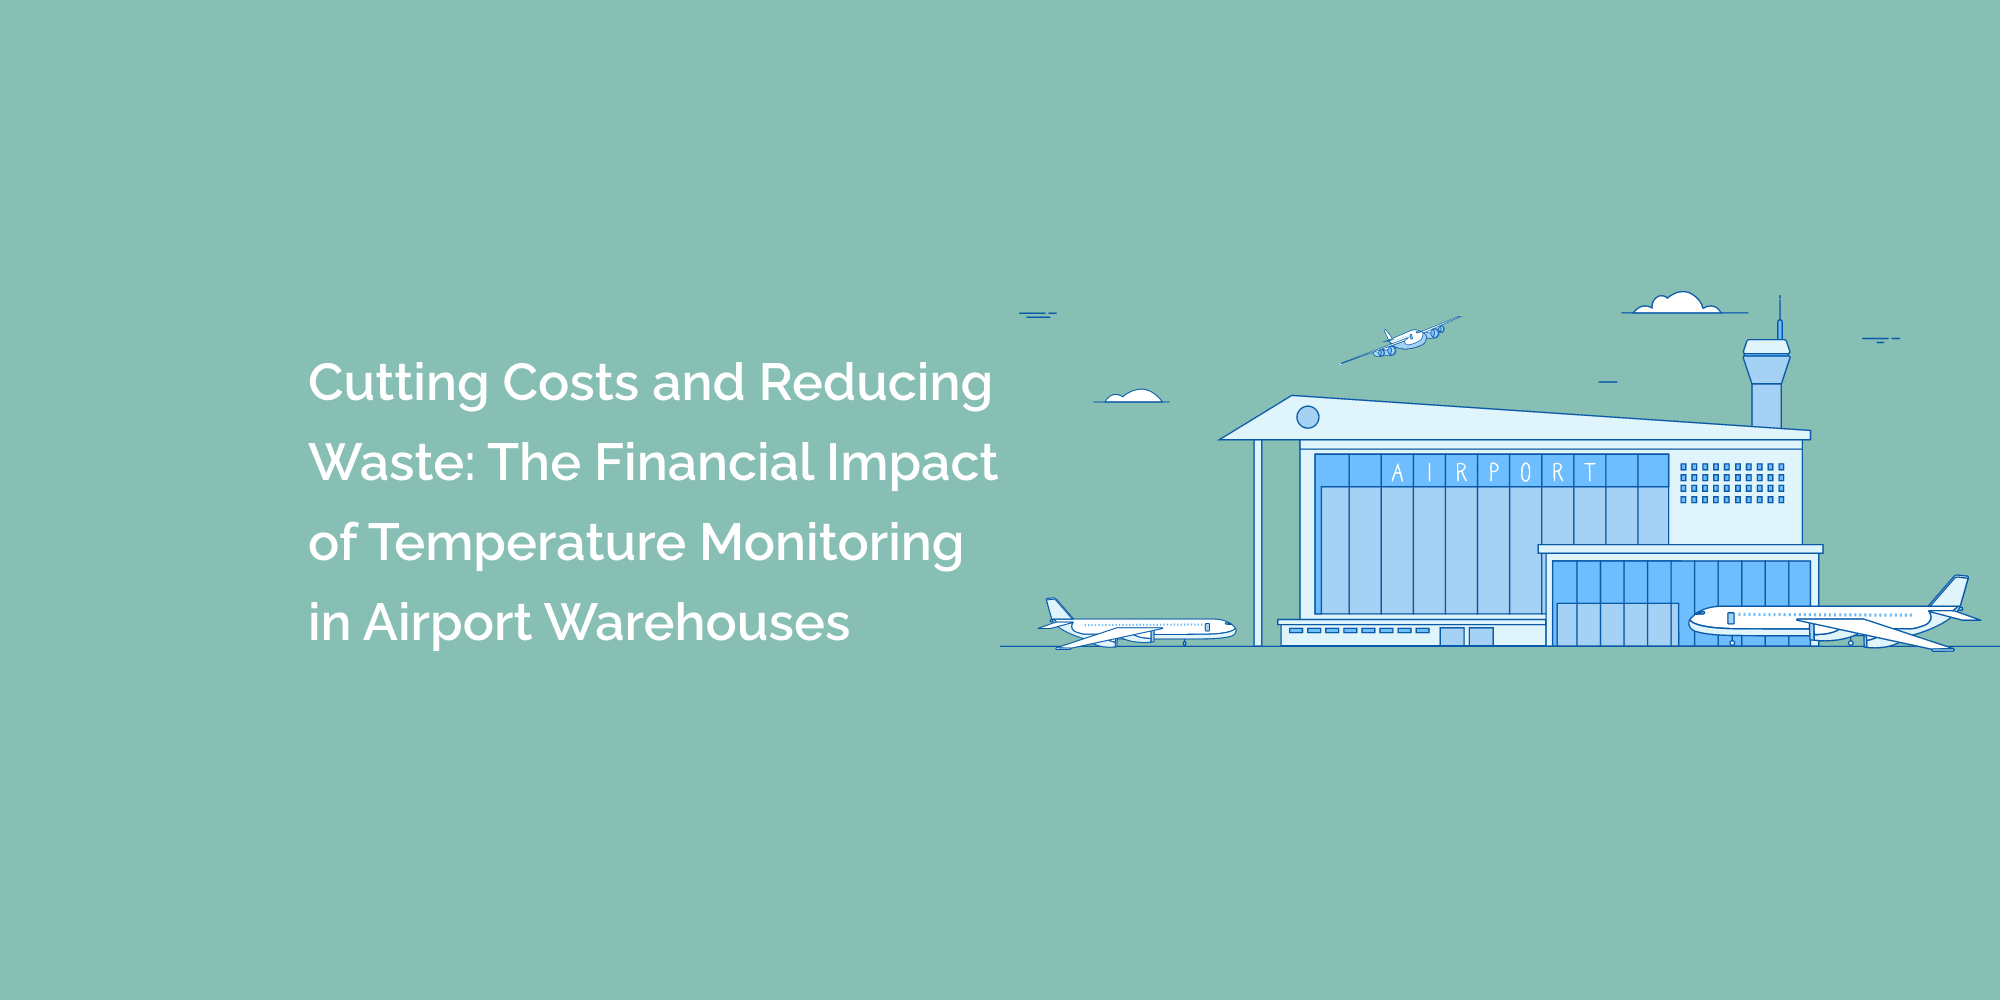 Cutting Costs and Reducing Waste: The Financial Impact of Temperature Monitoring in Airport Warehouses